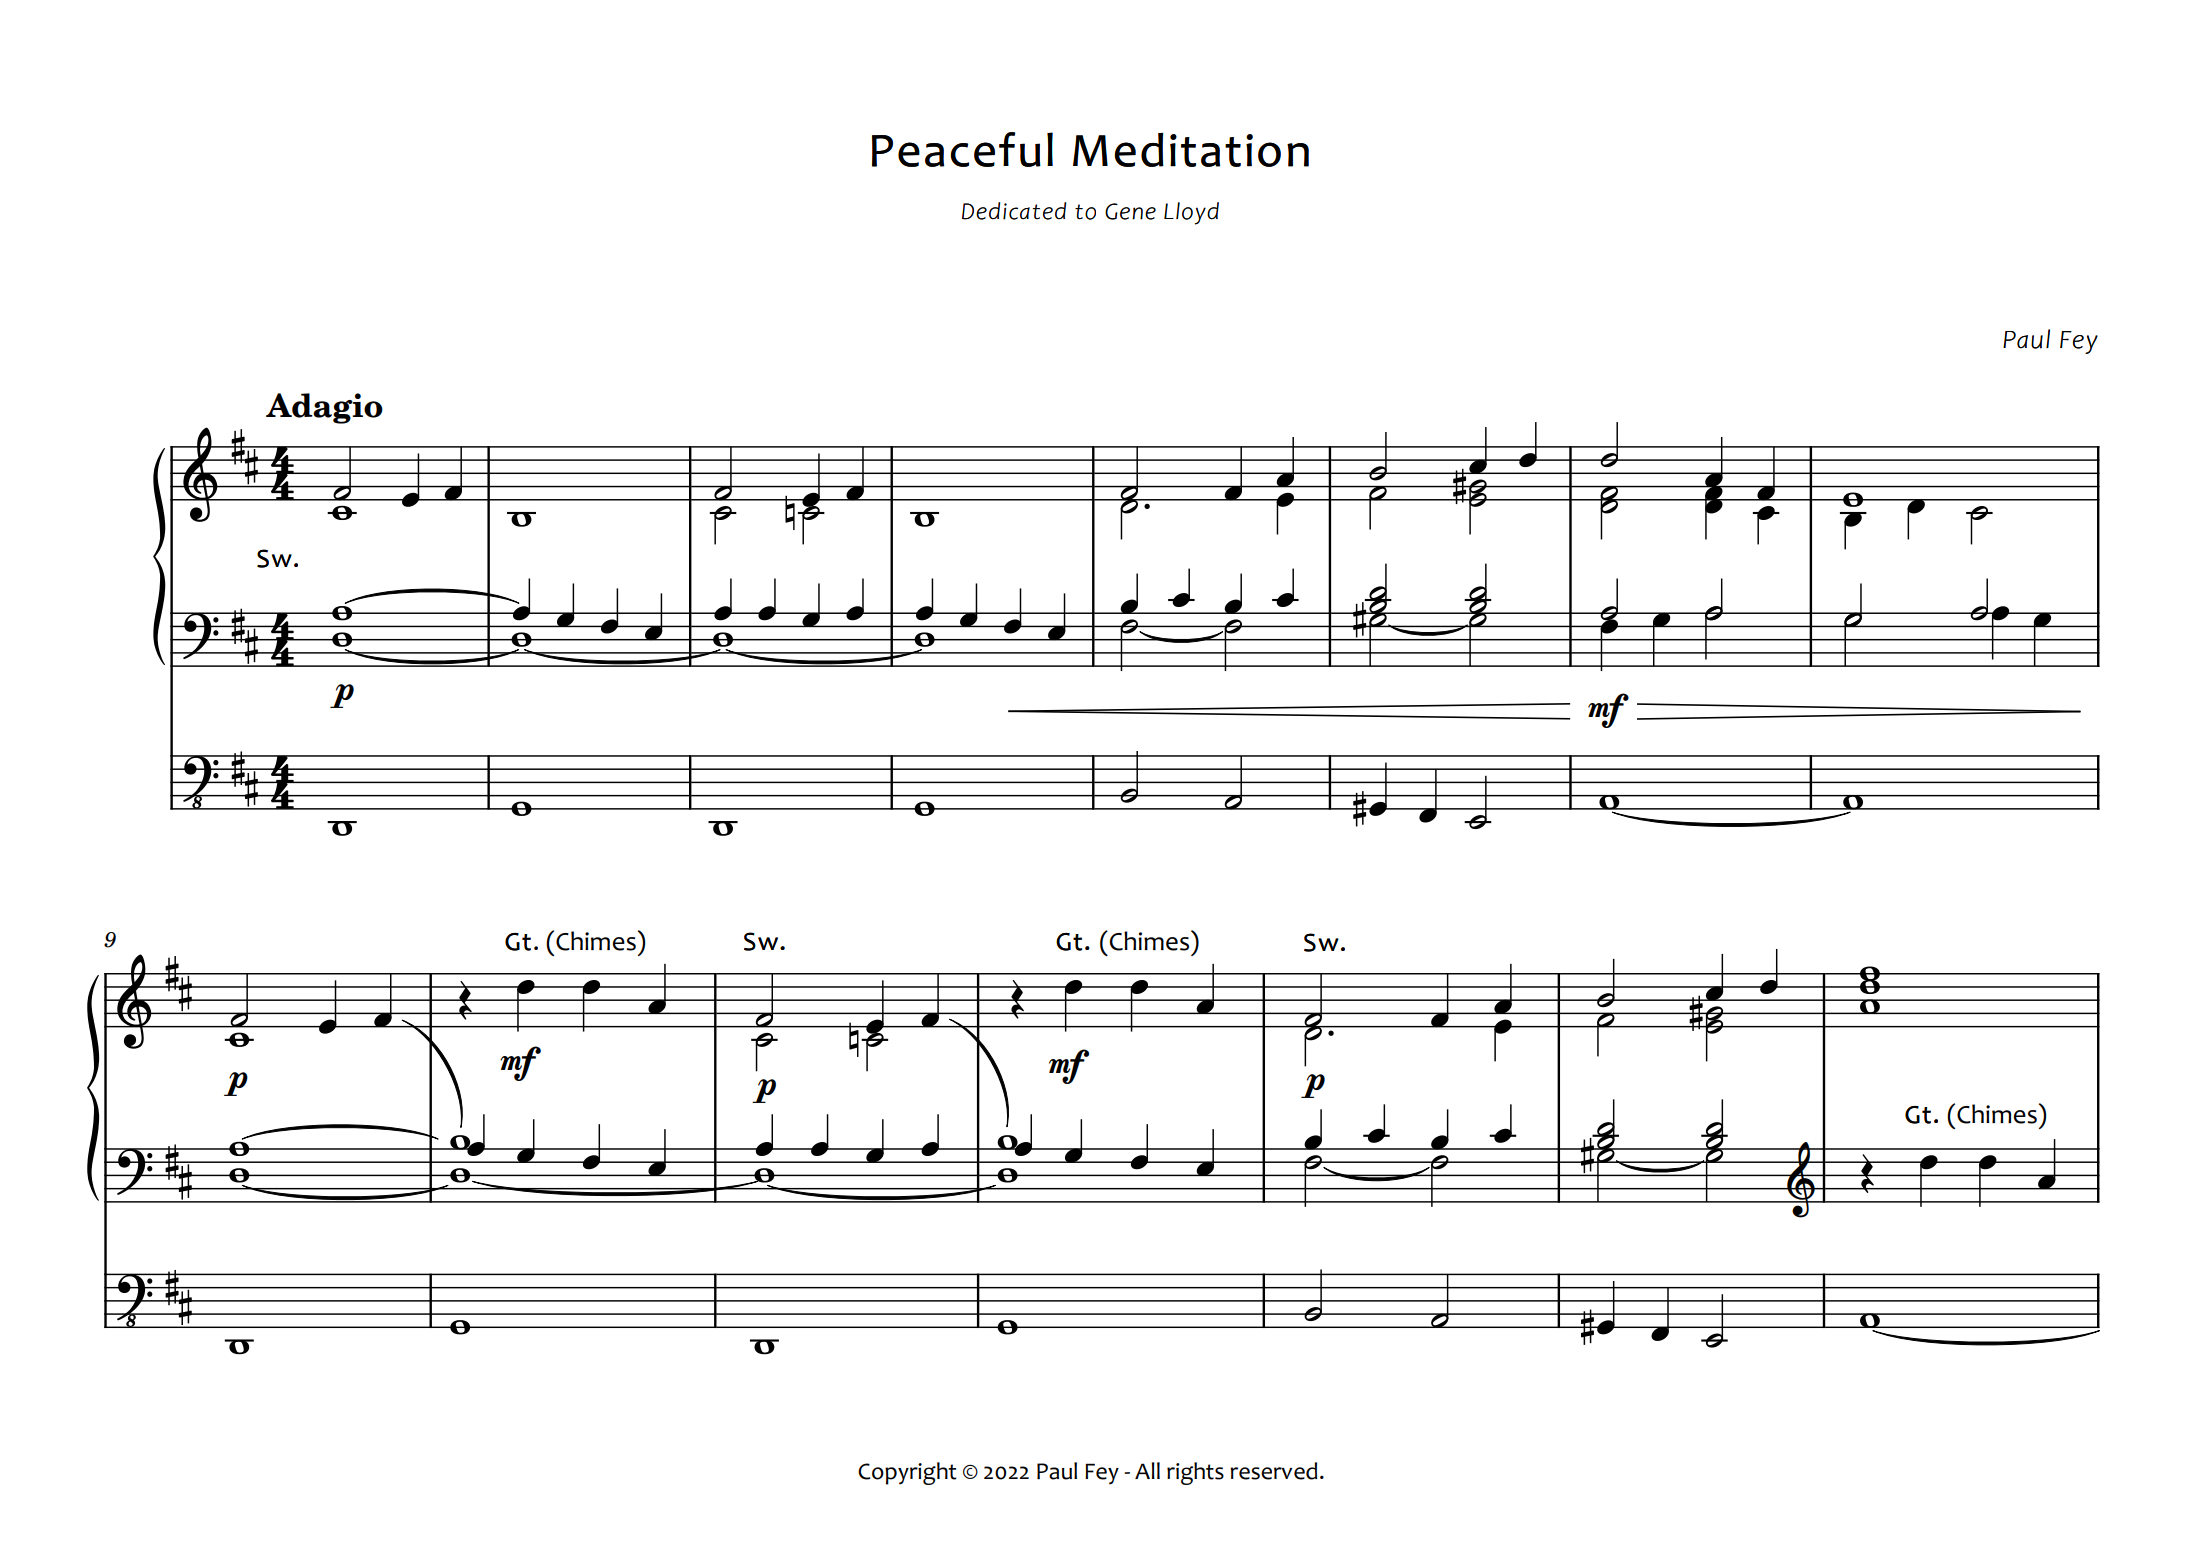 Peaceful Meditation" for Organ (Sheet Music) - Music for Pipe Organ by Paul Fey